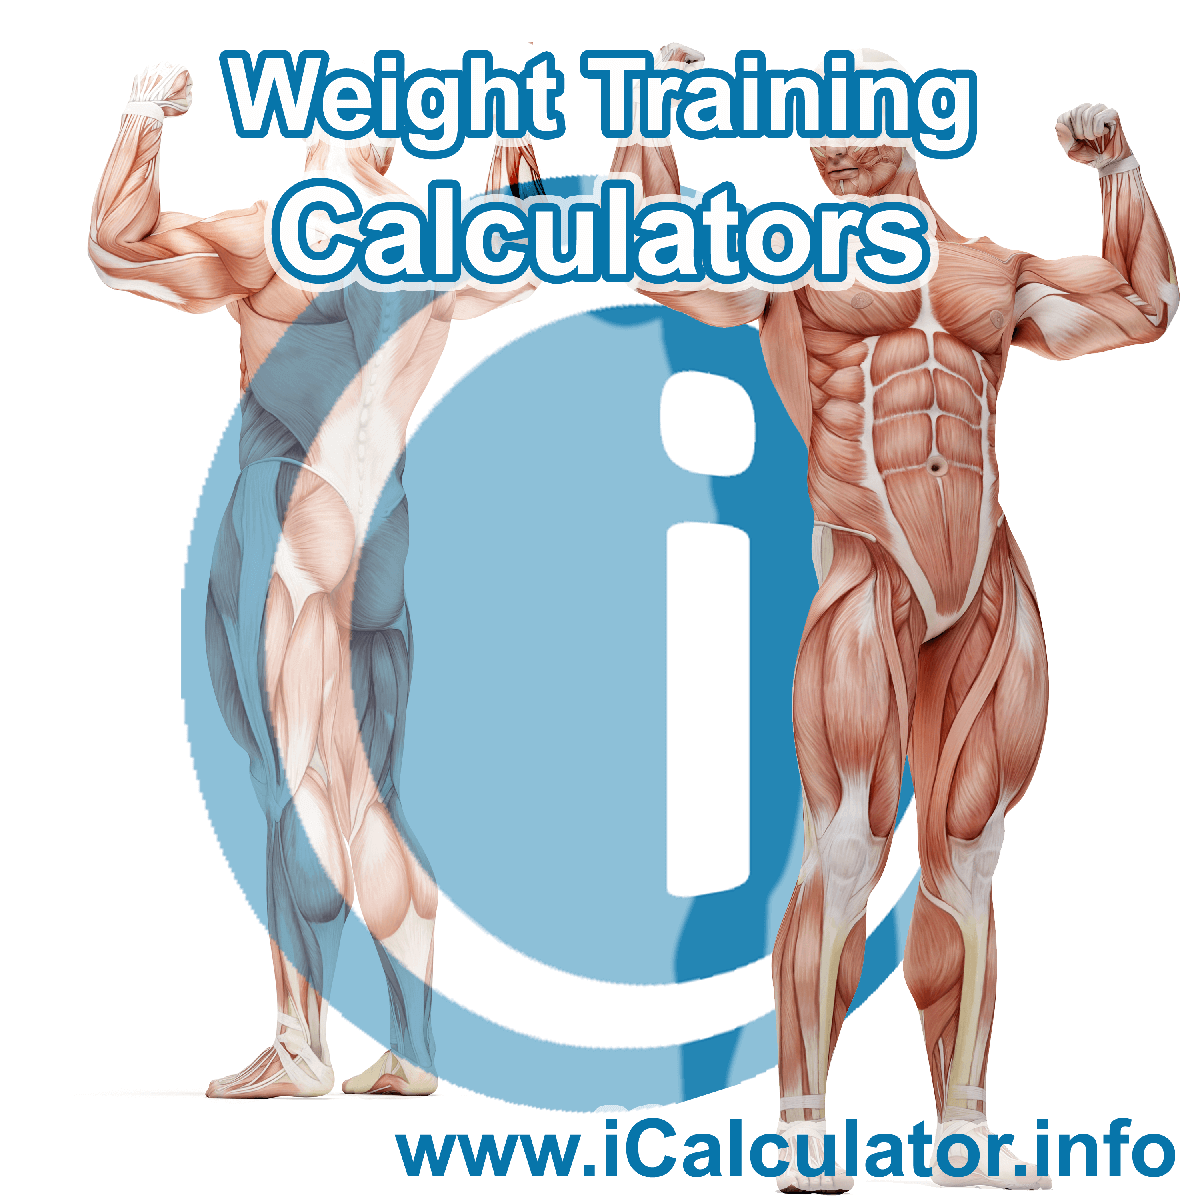 Weight Training Calculator. This image shows an Weight Training player playing weight training - by iCalculator